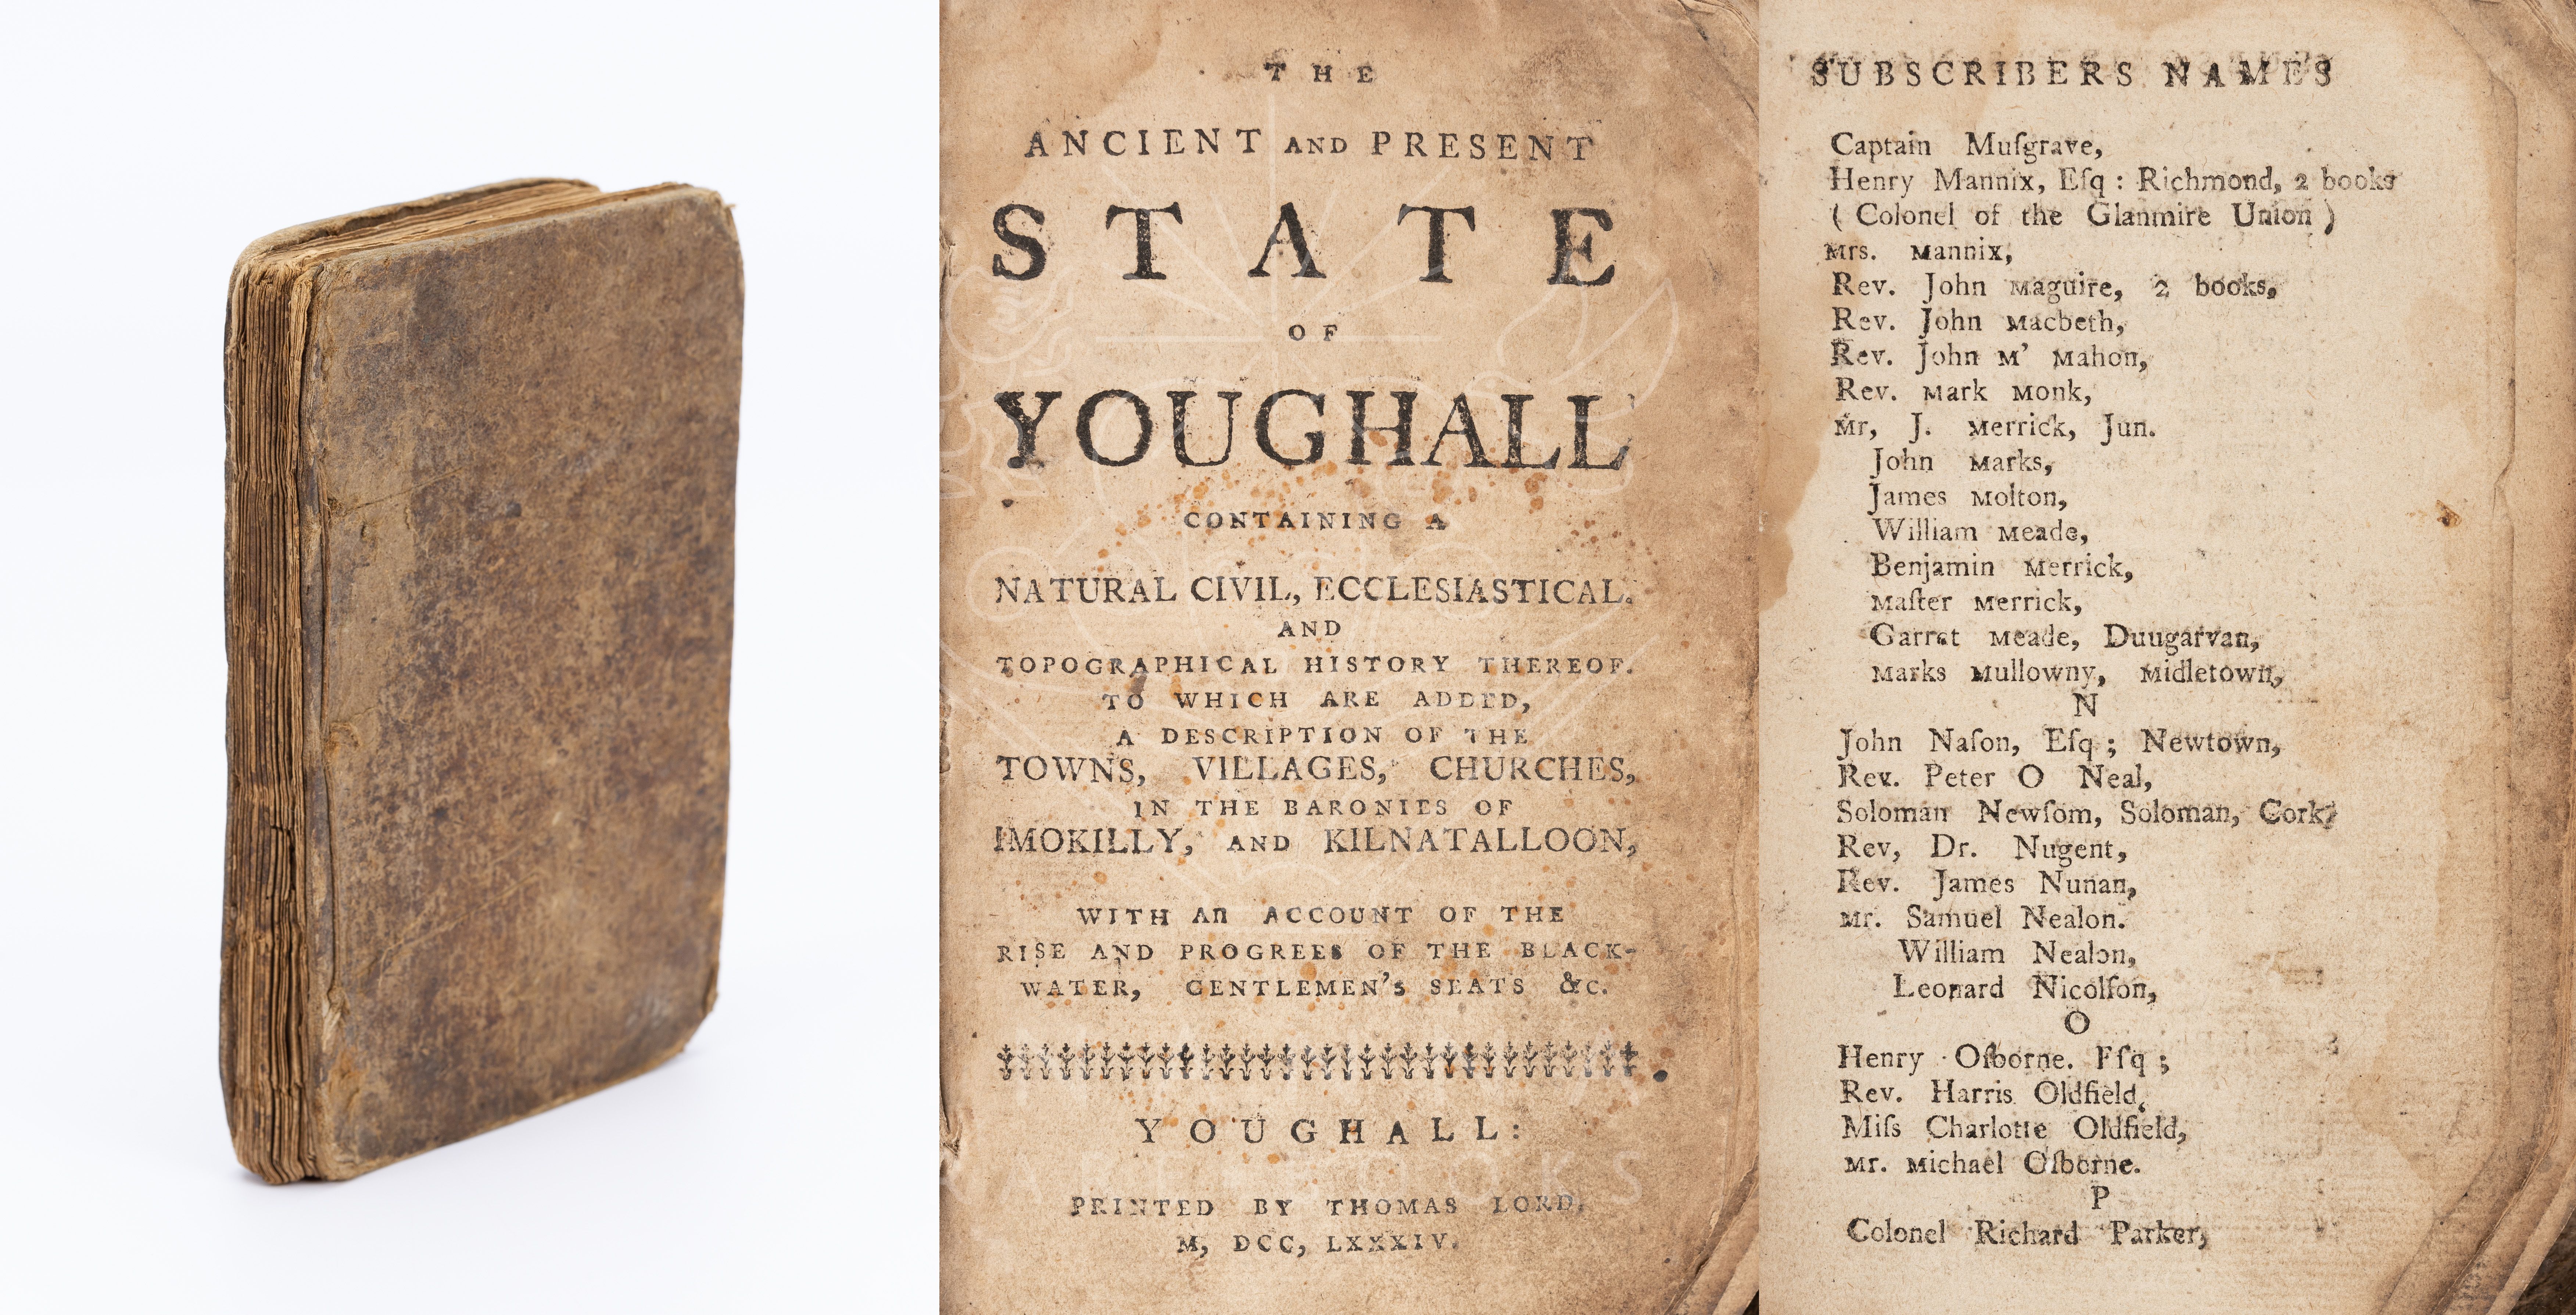 [Lord, The Ancient and Present State of Youghall [sic] [Youghal] –  Containing a